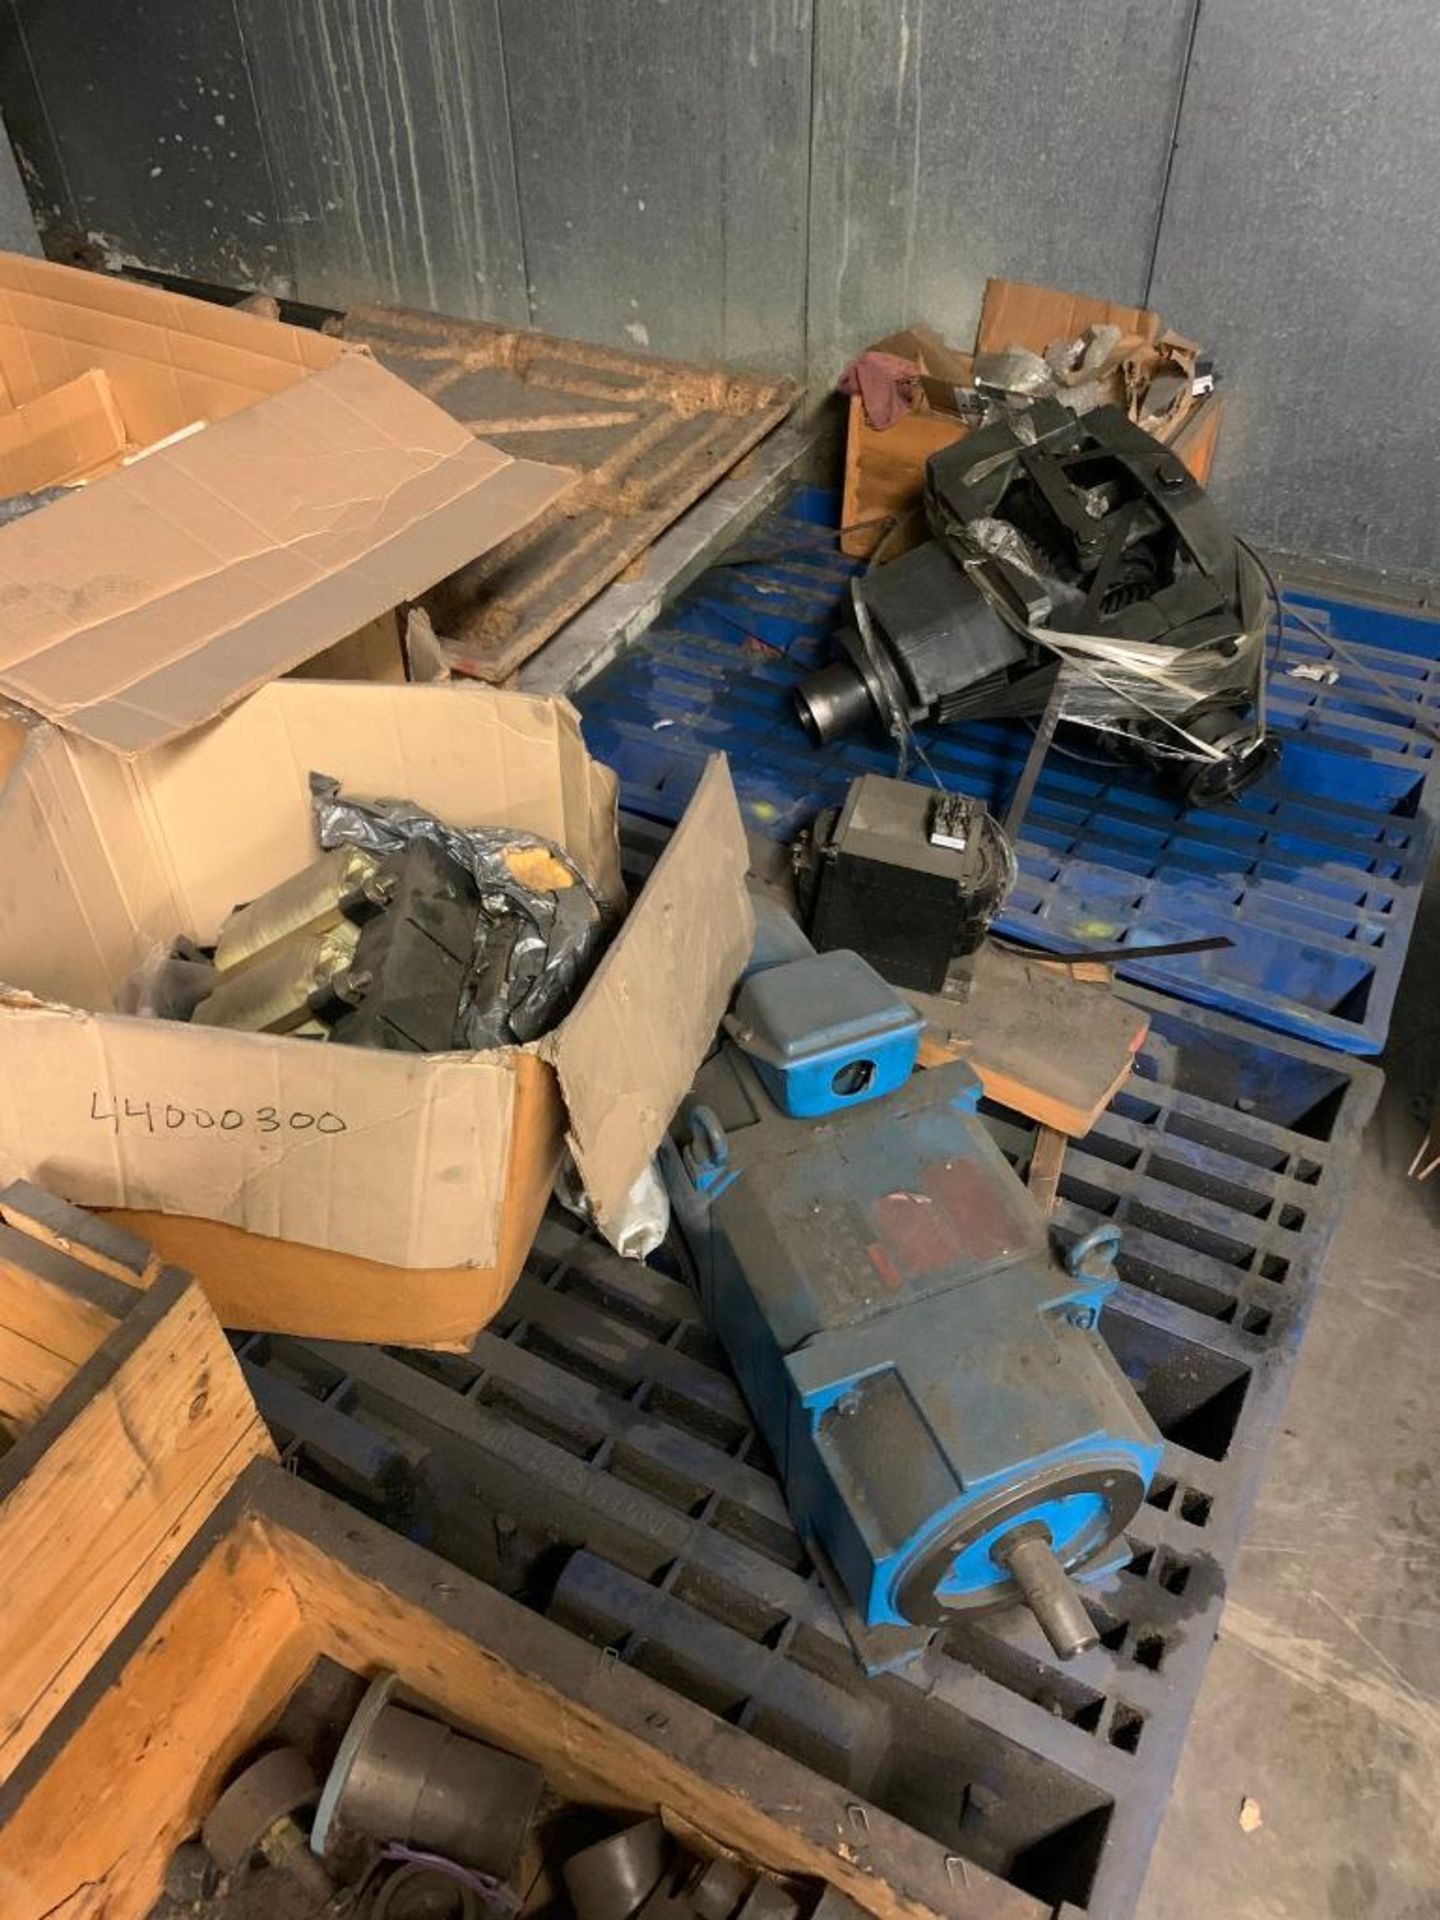 Items in Caged Area; Unitek Cutting Machine, Model 325-9H, 440 V, S/N 21787, Assorted Electric Motor - Image 25 of 47